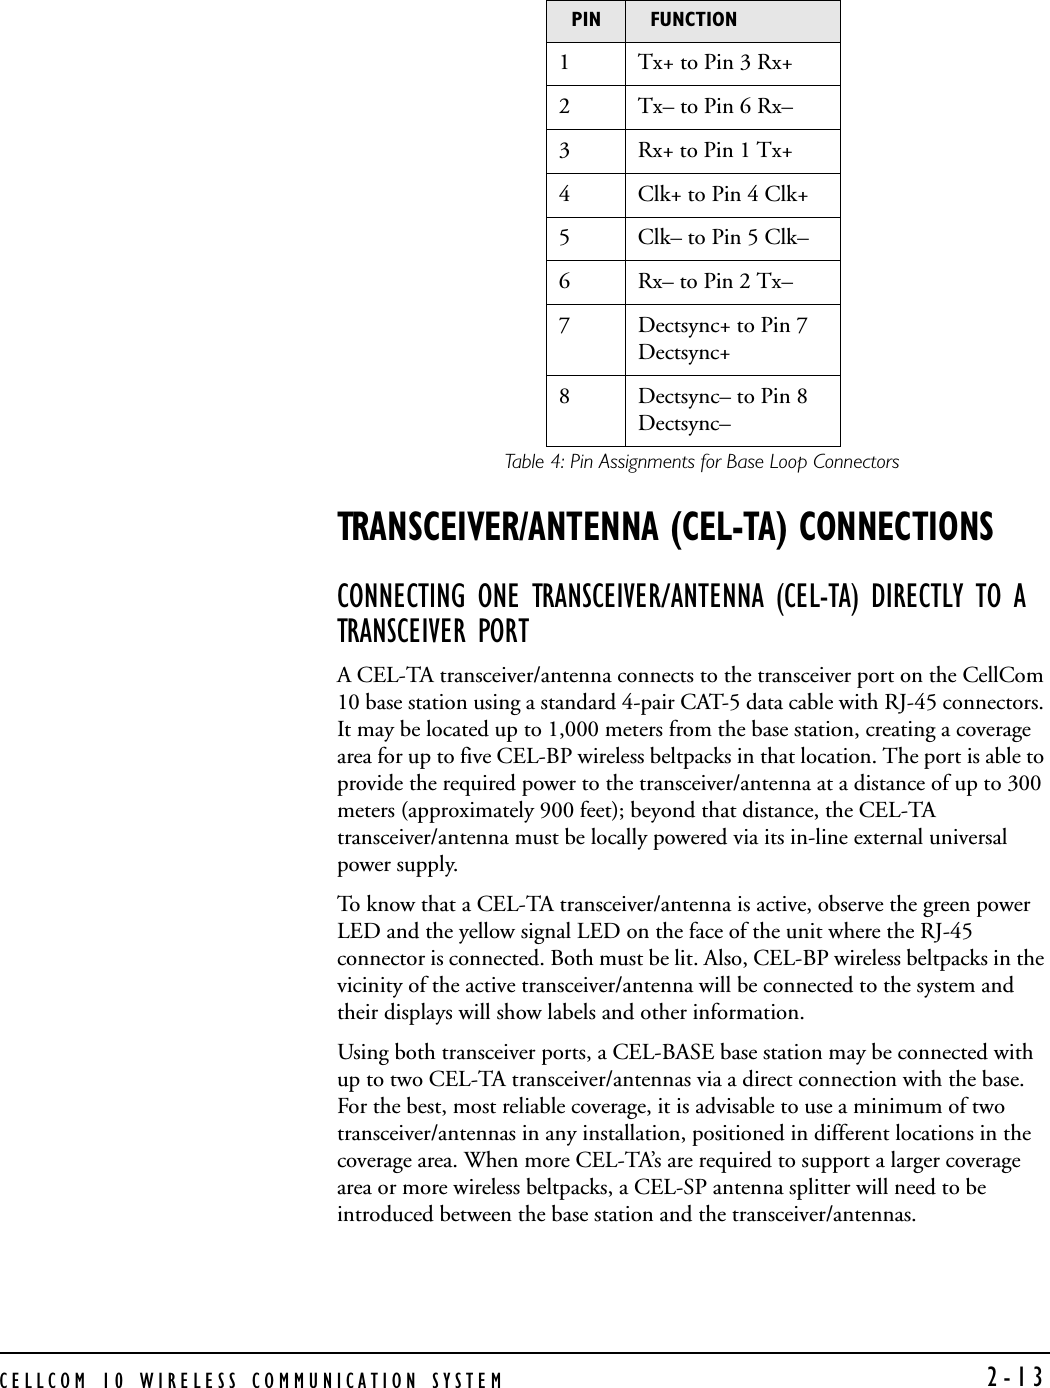 CELLCOM 10 WIRELESS COMMUNICATION SYSTEM  2-13Table 4: Pin Assignments for Base Loop ConnectorsTRANSCEIVER/ANTENNA (CEL-TA) CONNECTIONSCONNECTING ONE TRANSCEIVER/ANTENNA (CEL-TA) DIRECTLY TO A TRANSCEIVER PORTA CEL-TA transceiver/antenna connects to the transceiver port on the CellCom 10 base station using a standard 4-pair CAT-5 data cable with RJ-45 connectors. It may be located up to 1,000 meters from the base station, creating a coverage area for up to five CEL-BP wireless beltpacks in that location. The port is able to provide the required power to the transceiver/antenna at a distance of up to 300 meters (approximately 900 feet); beyond that distance, the CEL-TA transceiver/antenna must be locally powered via its in-line external universal power supply.To know that a CEL-TA transceiver/antenna is active, observe the green power LED and the yellow signal LED on the face of the unit where the RJ-45 connector is connected. Both must be lit. Also, CEL-BP wireless beltpacks in the vicinity of the active transceiver/antenna will be connected to the system and their displays will show labels and other information. Using both transceiver ports, a CEL-BASE base station may be connected with up to two CEL-TA transceiver/antennas via a direct connection with the base. For the best, most reliable coverage, it is advisable to use a minimum of two transceiver/antennas in any installation, positioned in different locations in the coverage area. When more CEL-TA’s are required to support a larger coverage area or more wireless beltpacks, a CEL-SP antenna splitter will need to be introduced between the base station and the transceiver/antennas.PIN FUNCTION1Tx+ to Pin 3 Rx+2Tx– to Pin 6 Rx–3 Rx+ to Pin 1 Tx+ 4 Clk+ to Pin 4 Clk+5 Clk– to Pin 5 Clk–6Rx– to Pin 2 Tx–7 Dectsync+ to Pin 7 Dectsync+8 Dectsync– to Pin 8 Dectsync–